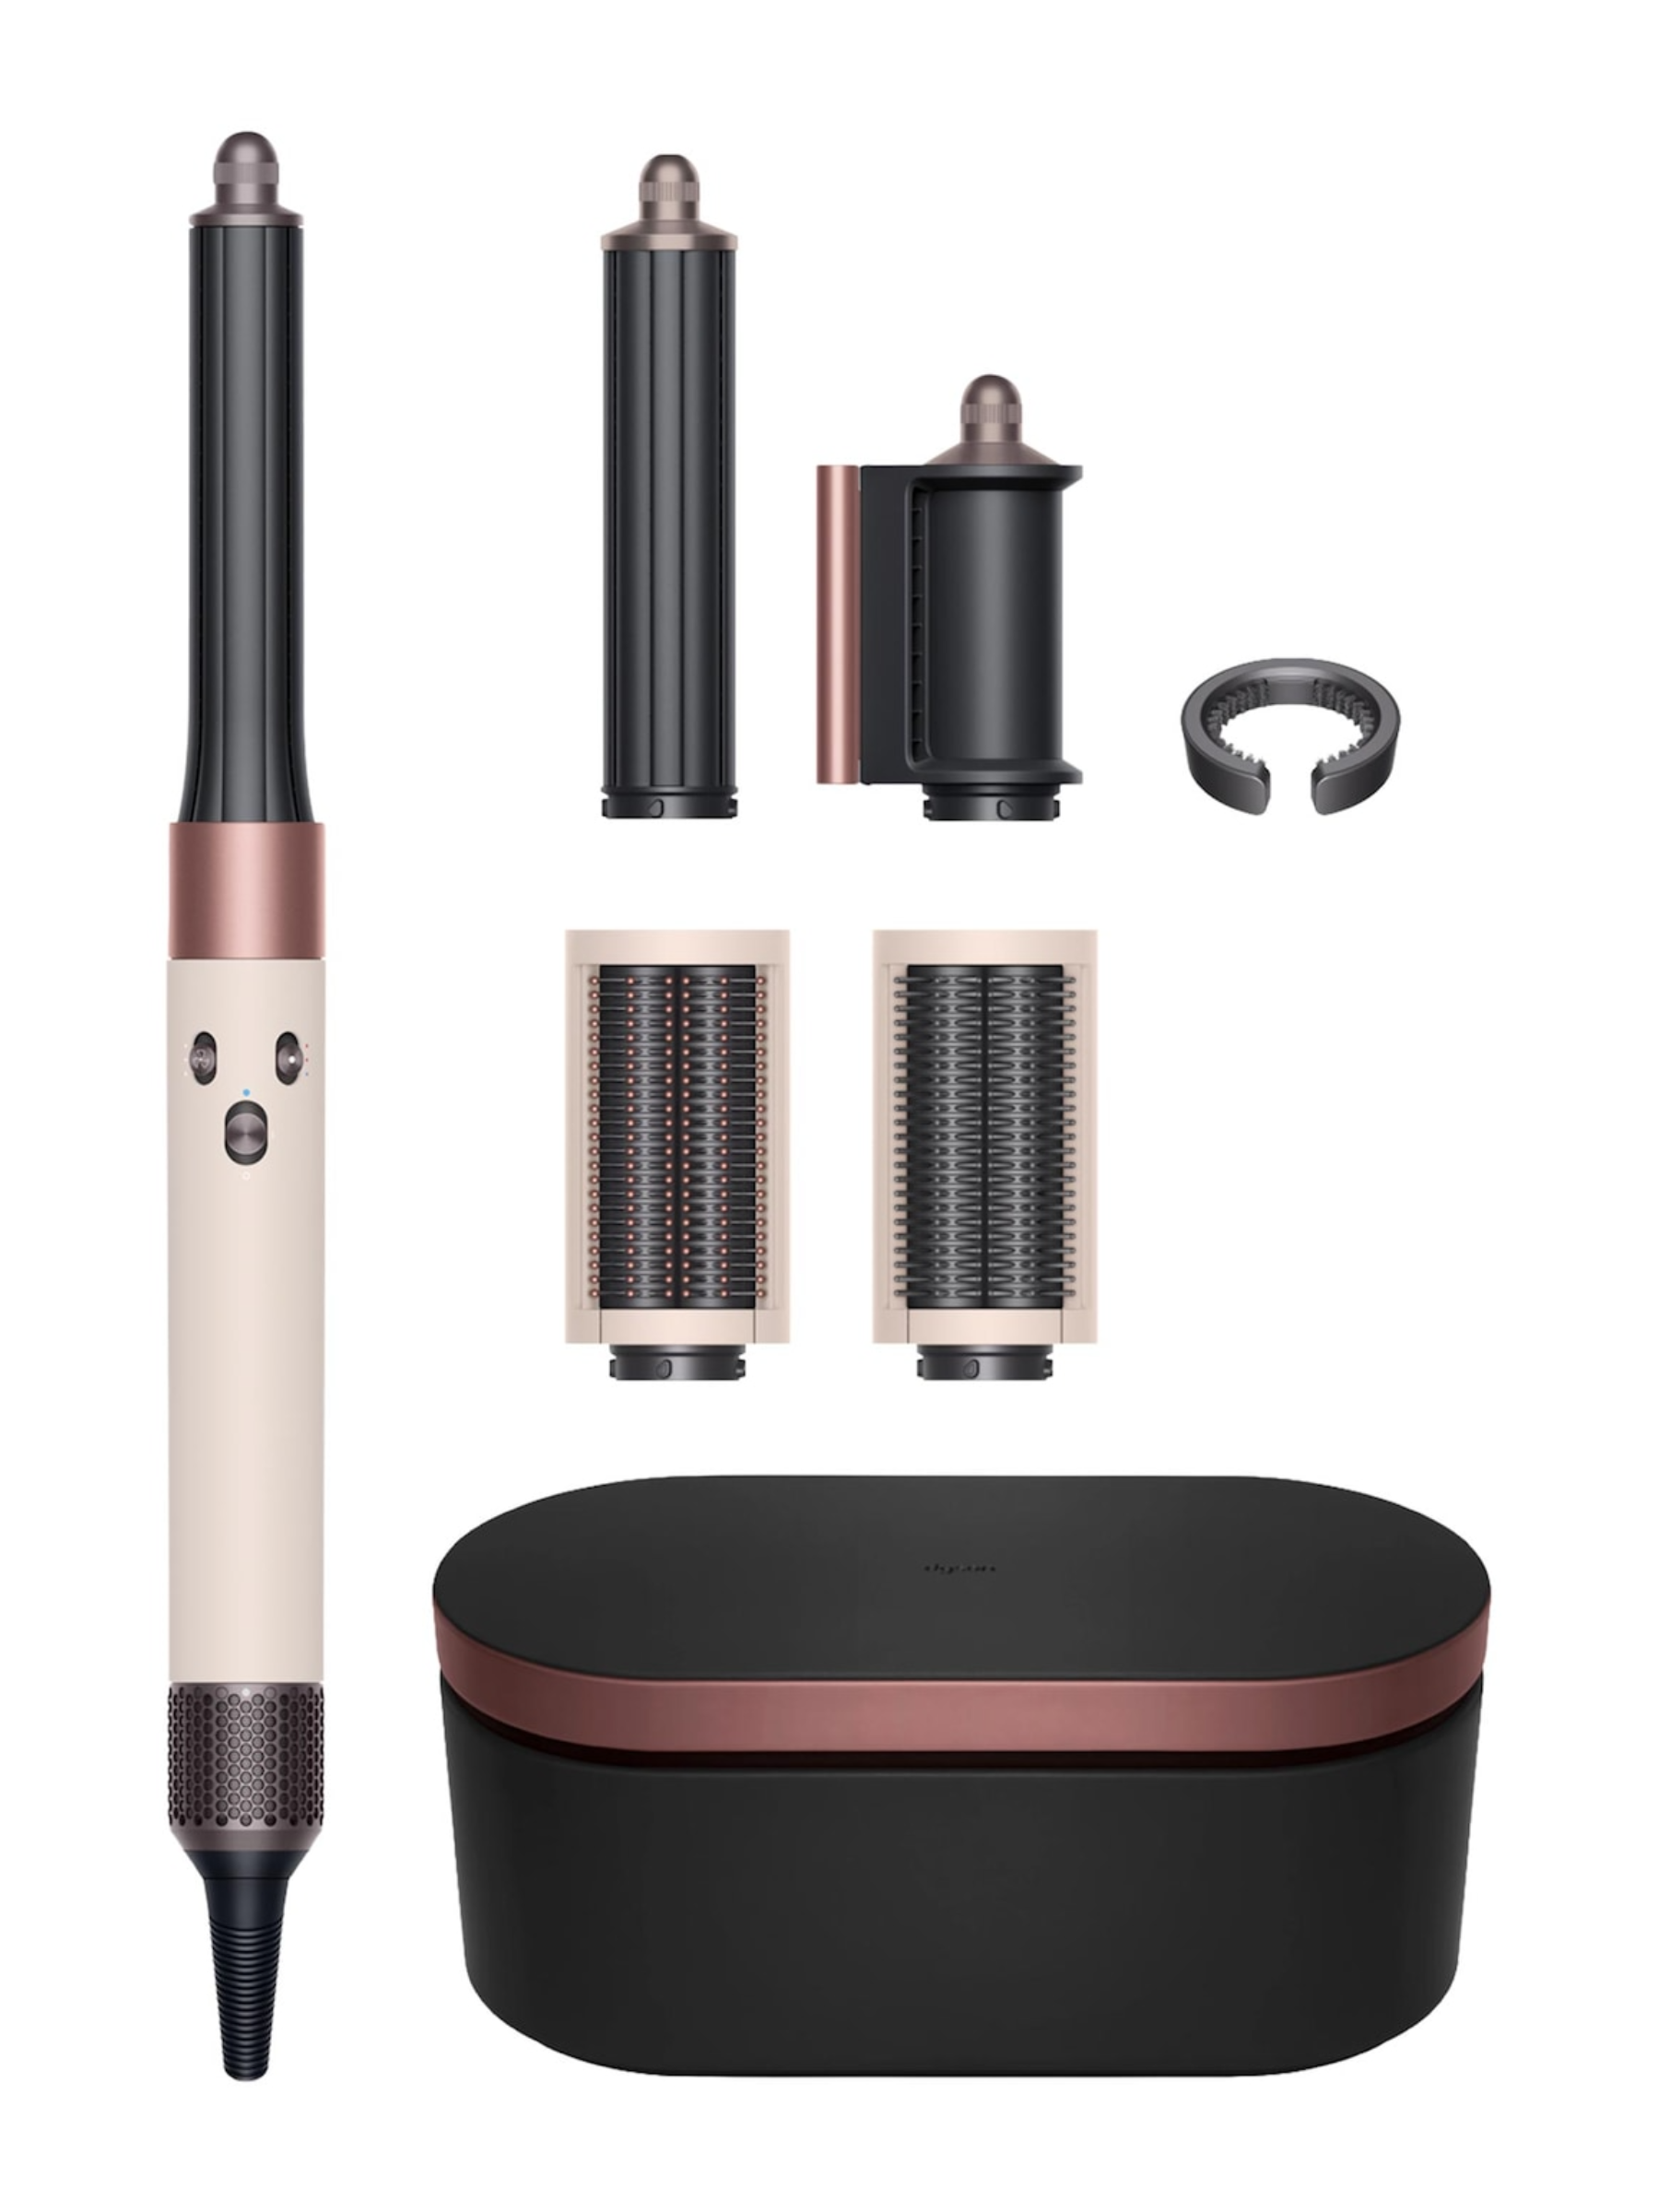 Consider the <a href="https://www.glamour.com/story/dyson-airwrap-multi-styler-complete-review?mbid=synd_msn_rss&utm_source=msn&utm_medium=syndication">Dyson Airwrap</a> an investment piece for your teen. The iconic styler comes with five attachments for drying and styling different hair textures, and can all be stashed in the carrying case that’s included. $599, Sephora. <a href="https://www.sephora.com/product/dyson-limited-edition-airwrap-multi-styler-in-pink-rose-gold-P510928">Get it now!</a><p>Sign up for today’s biggest stories, from pop culture to politics.</p><a href="https://www.glamour.com/newsletter/news?sourceCode=msnsend">Sign Up</a>